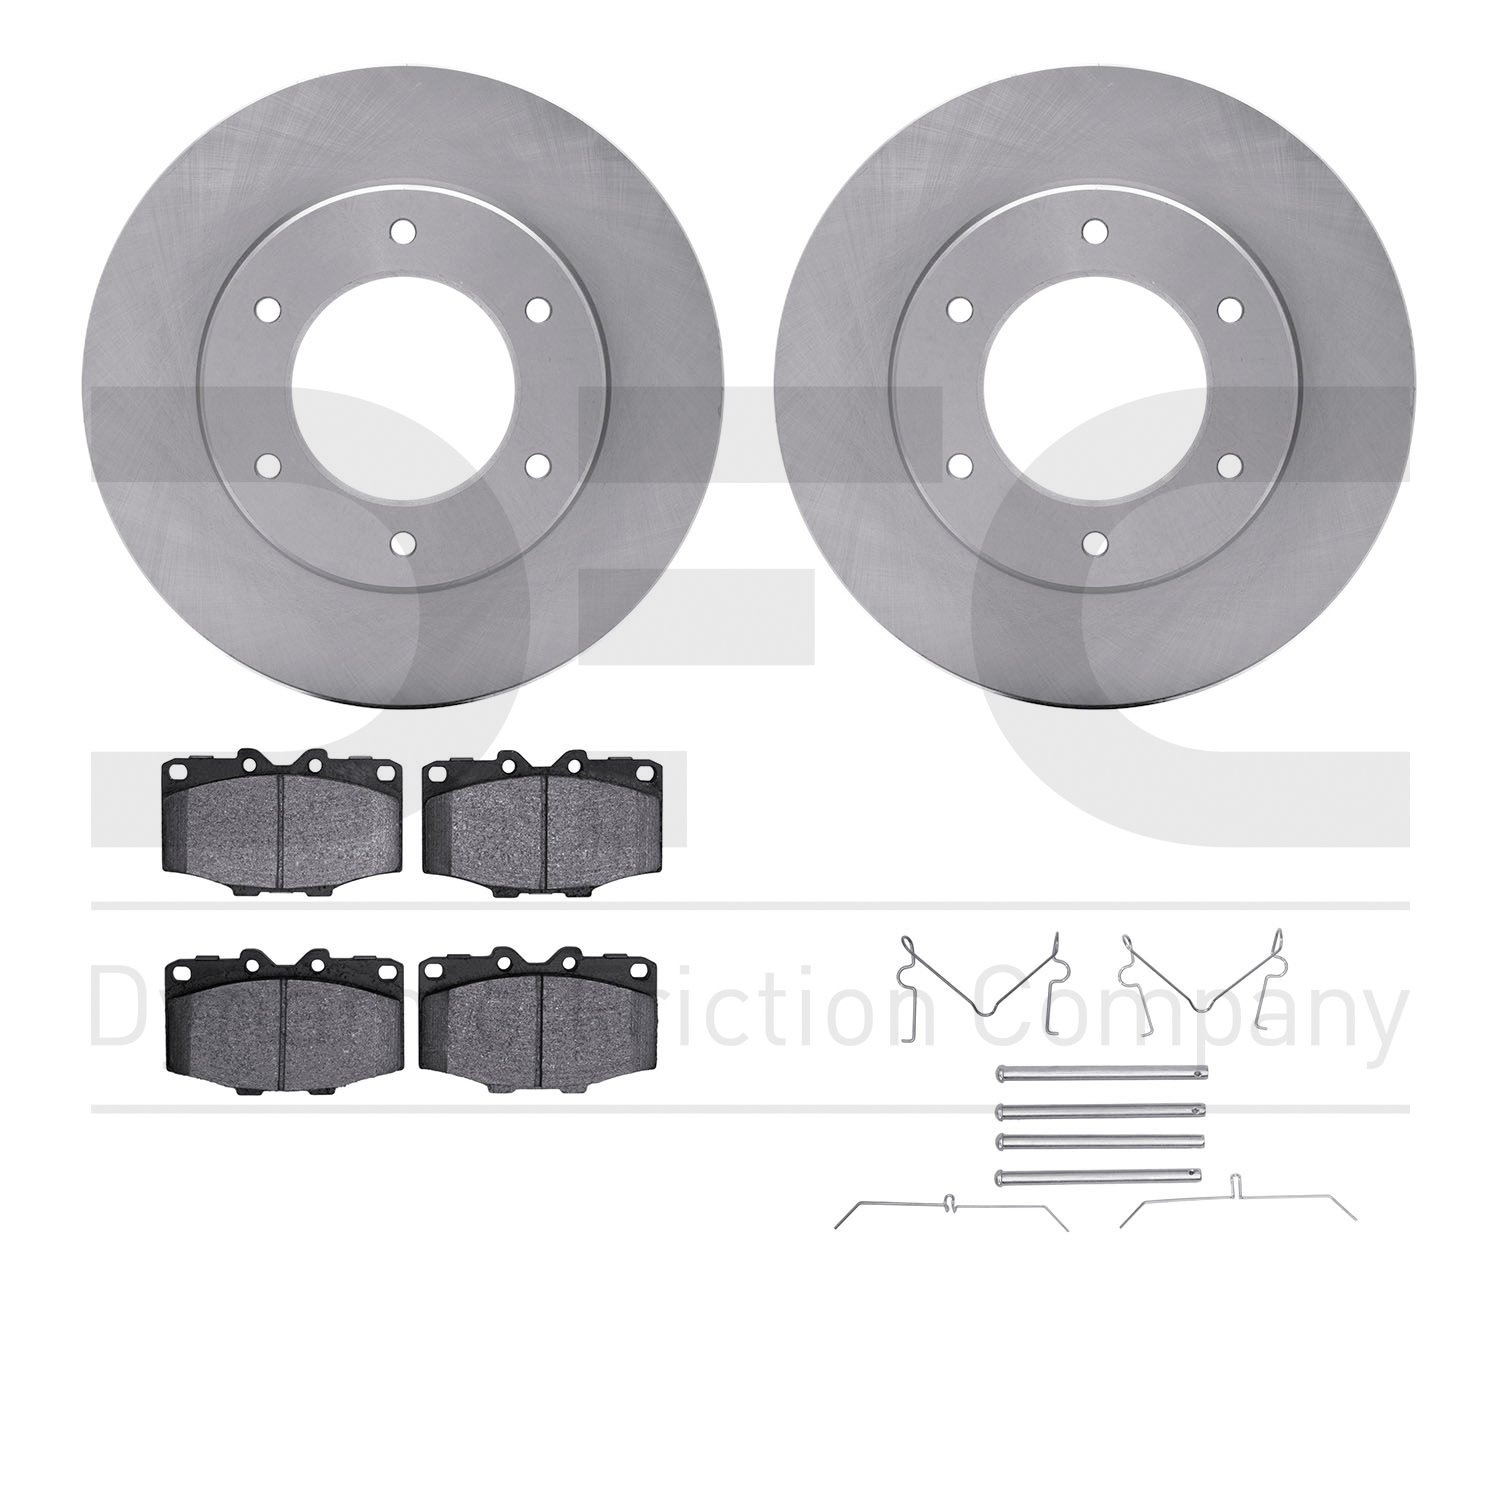 6412-76004 Brake Rotors with Ultimate-Duty Brake Pads Kit & Hardware, 1979-1980 Lexus/Toyota/Scion, Position: Front